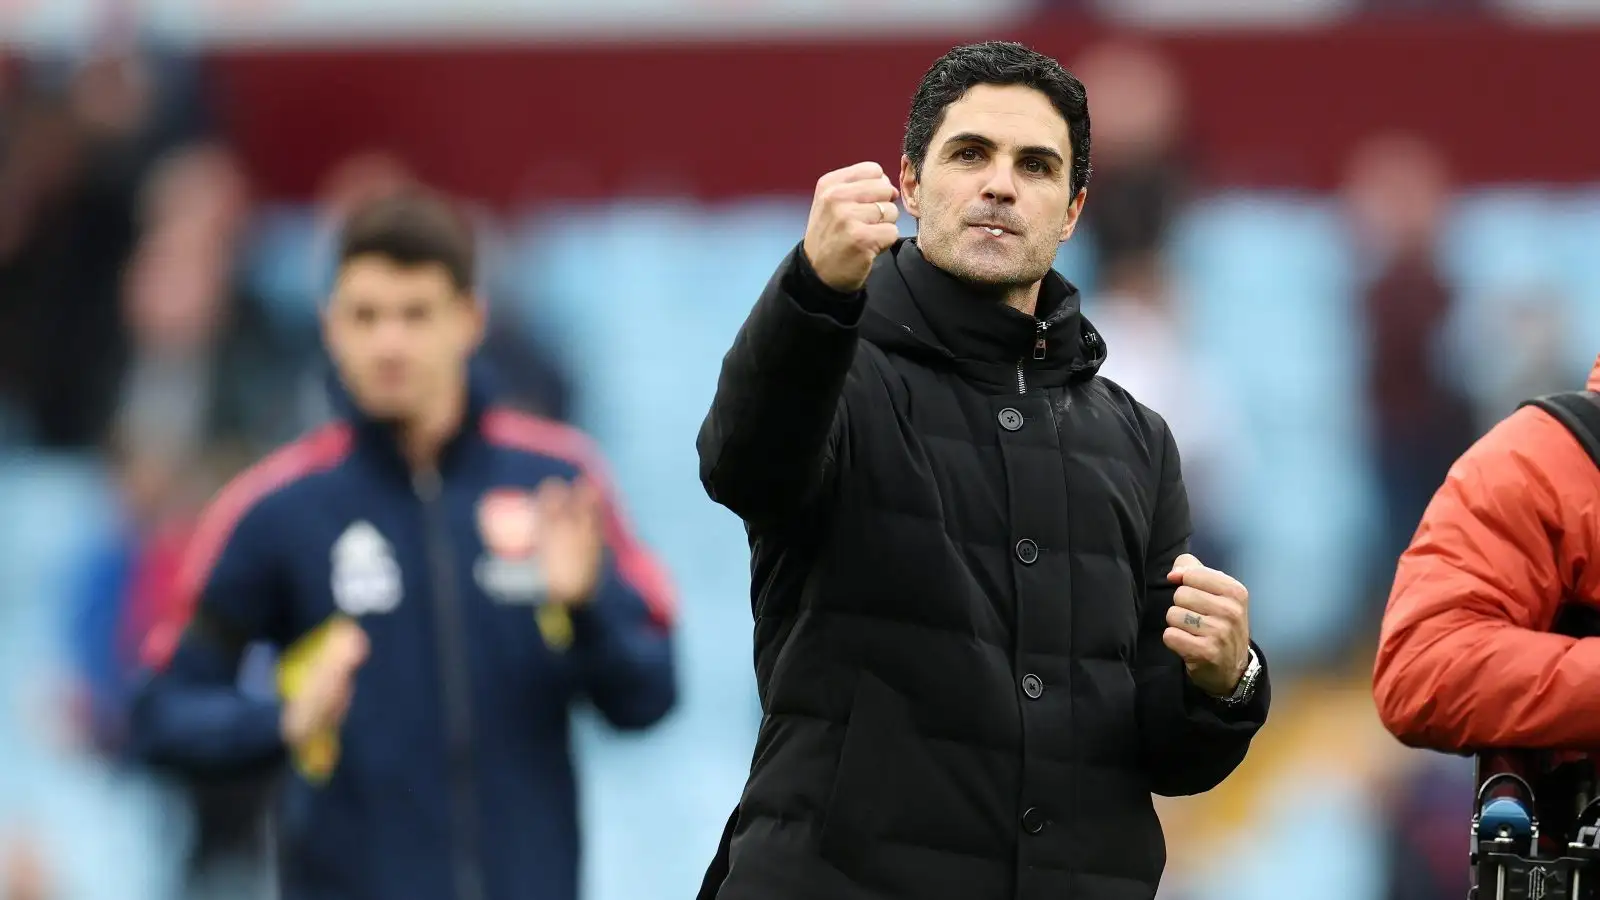 Mikel Arteta’s act of comedy genius will surely boil Richard Keys’ p*ss